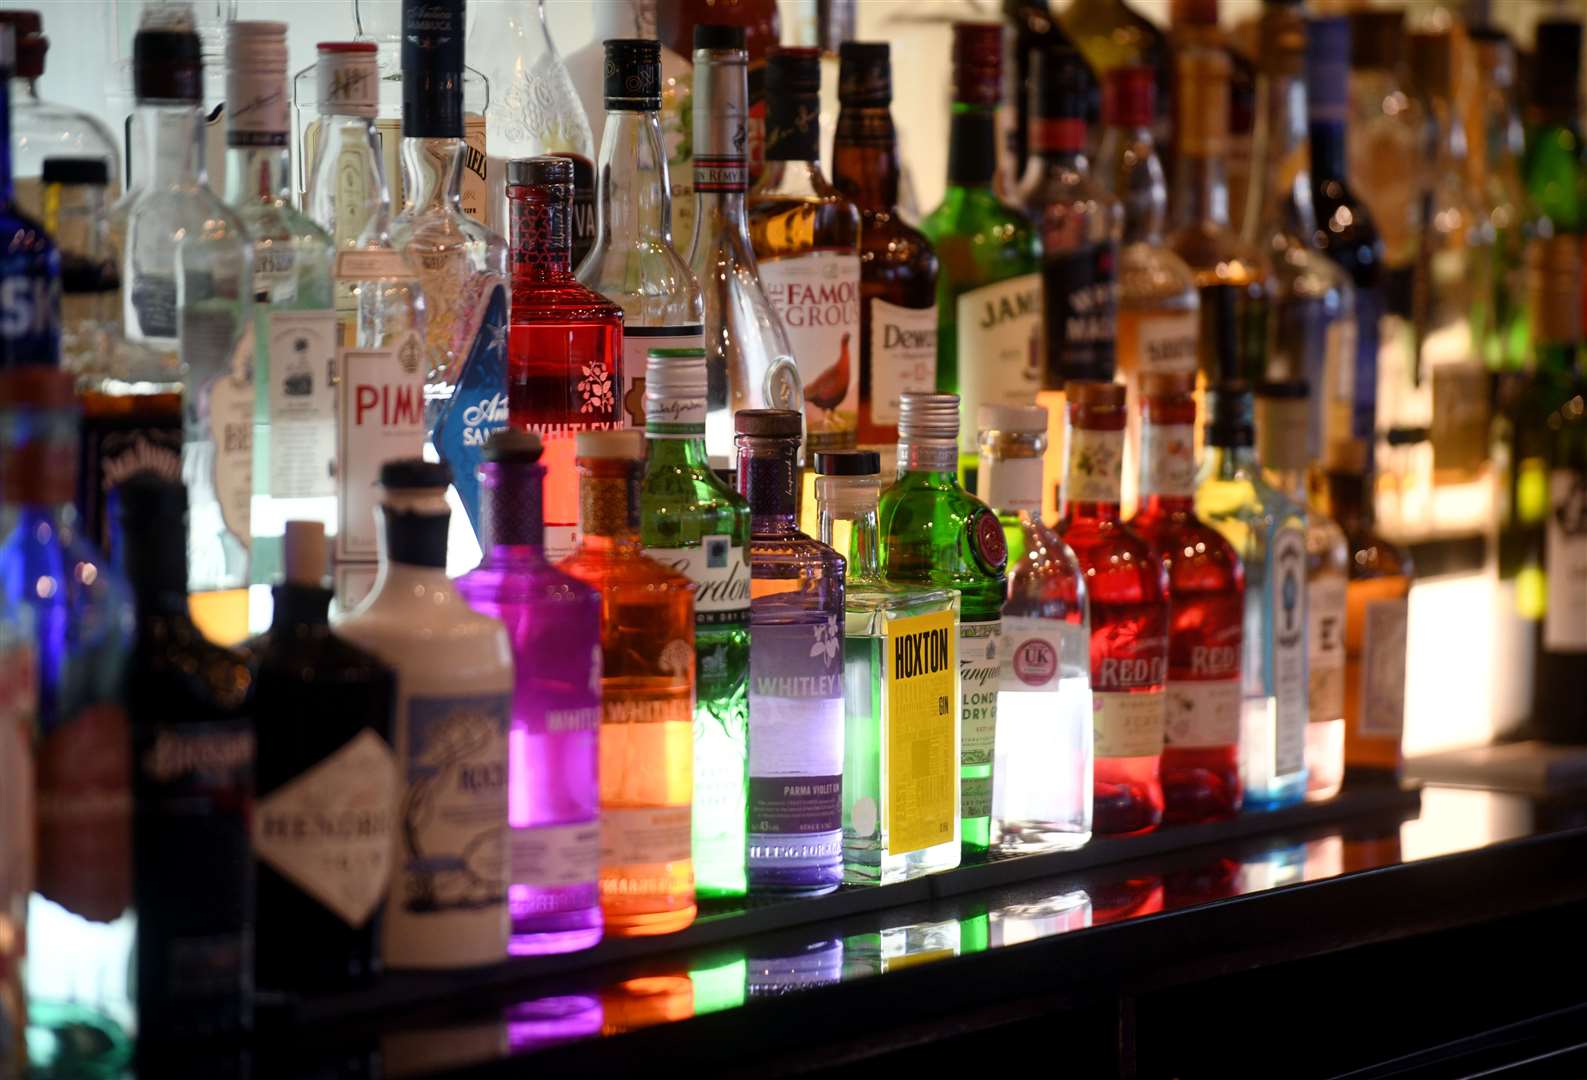 A consultation on the continuation of the minimum unit pricing legislation for alcohol has been welcomed.